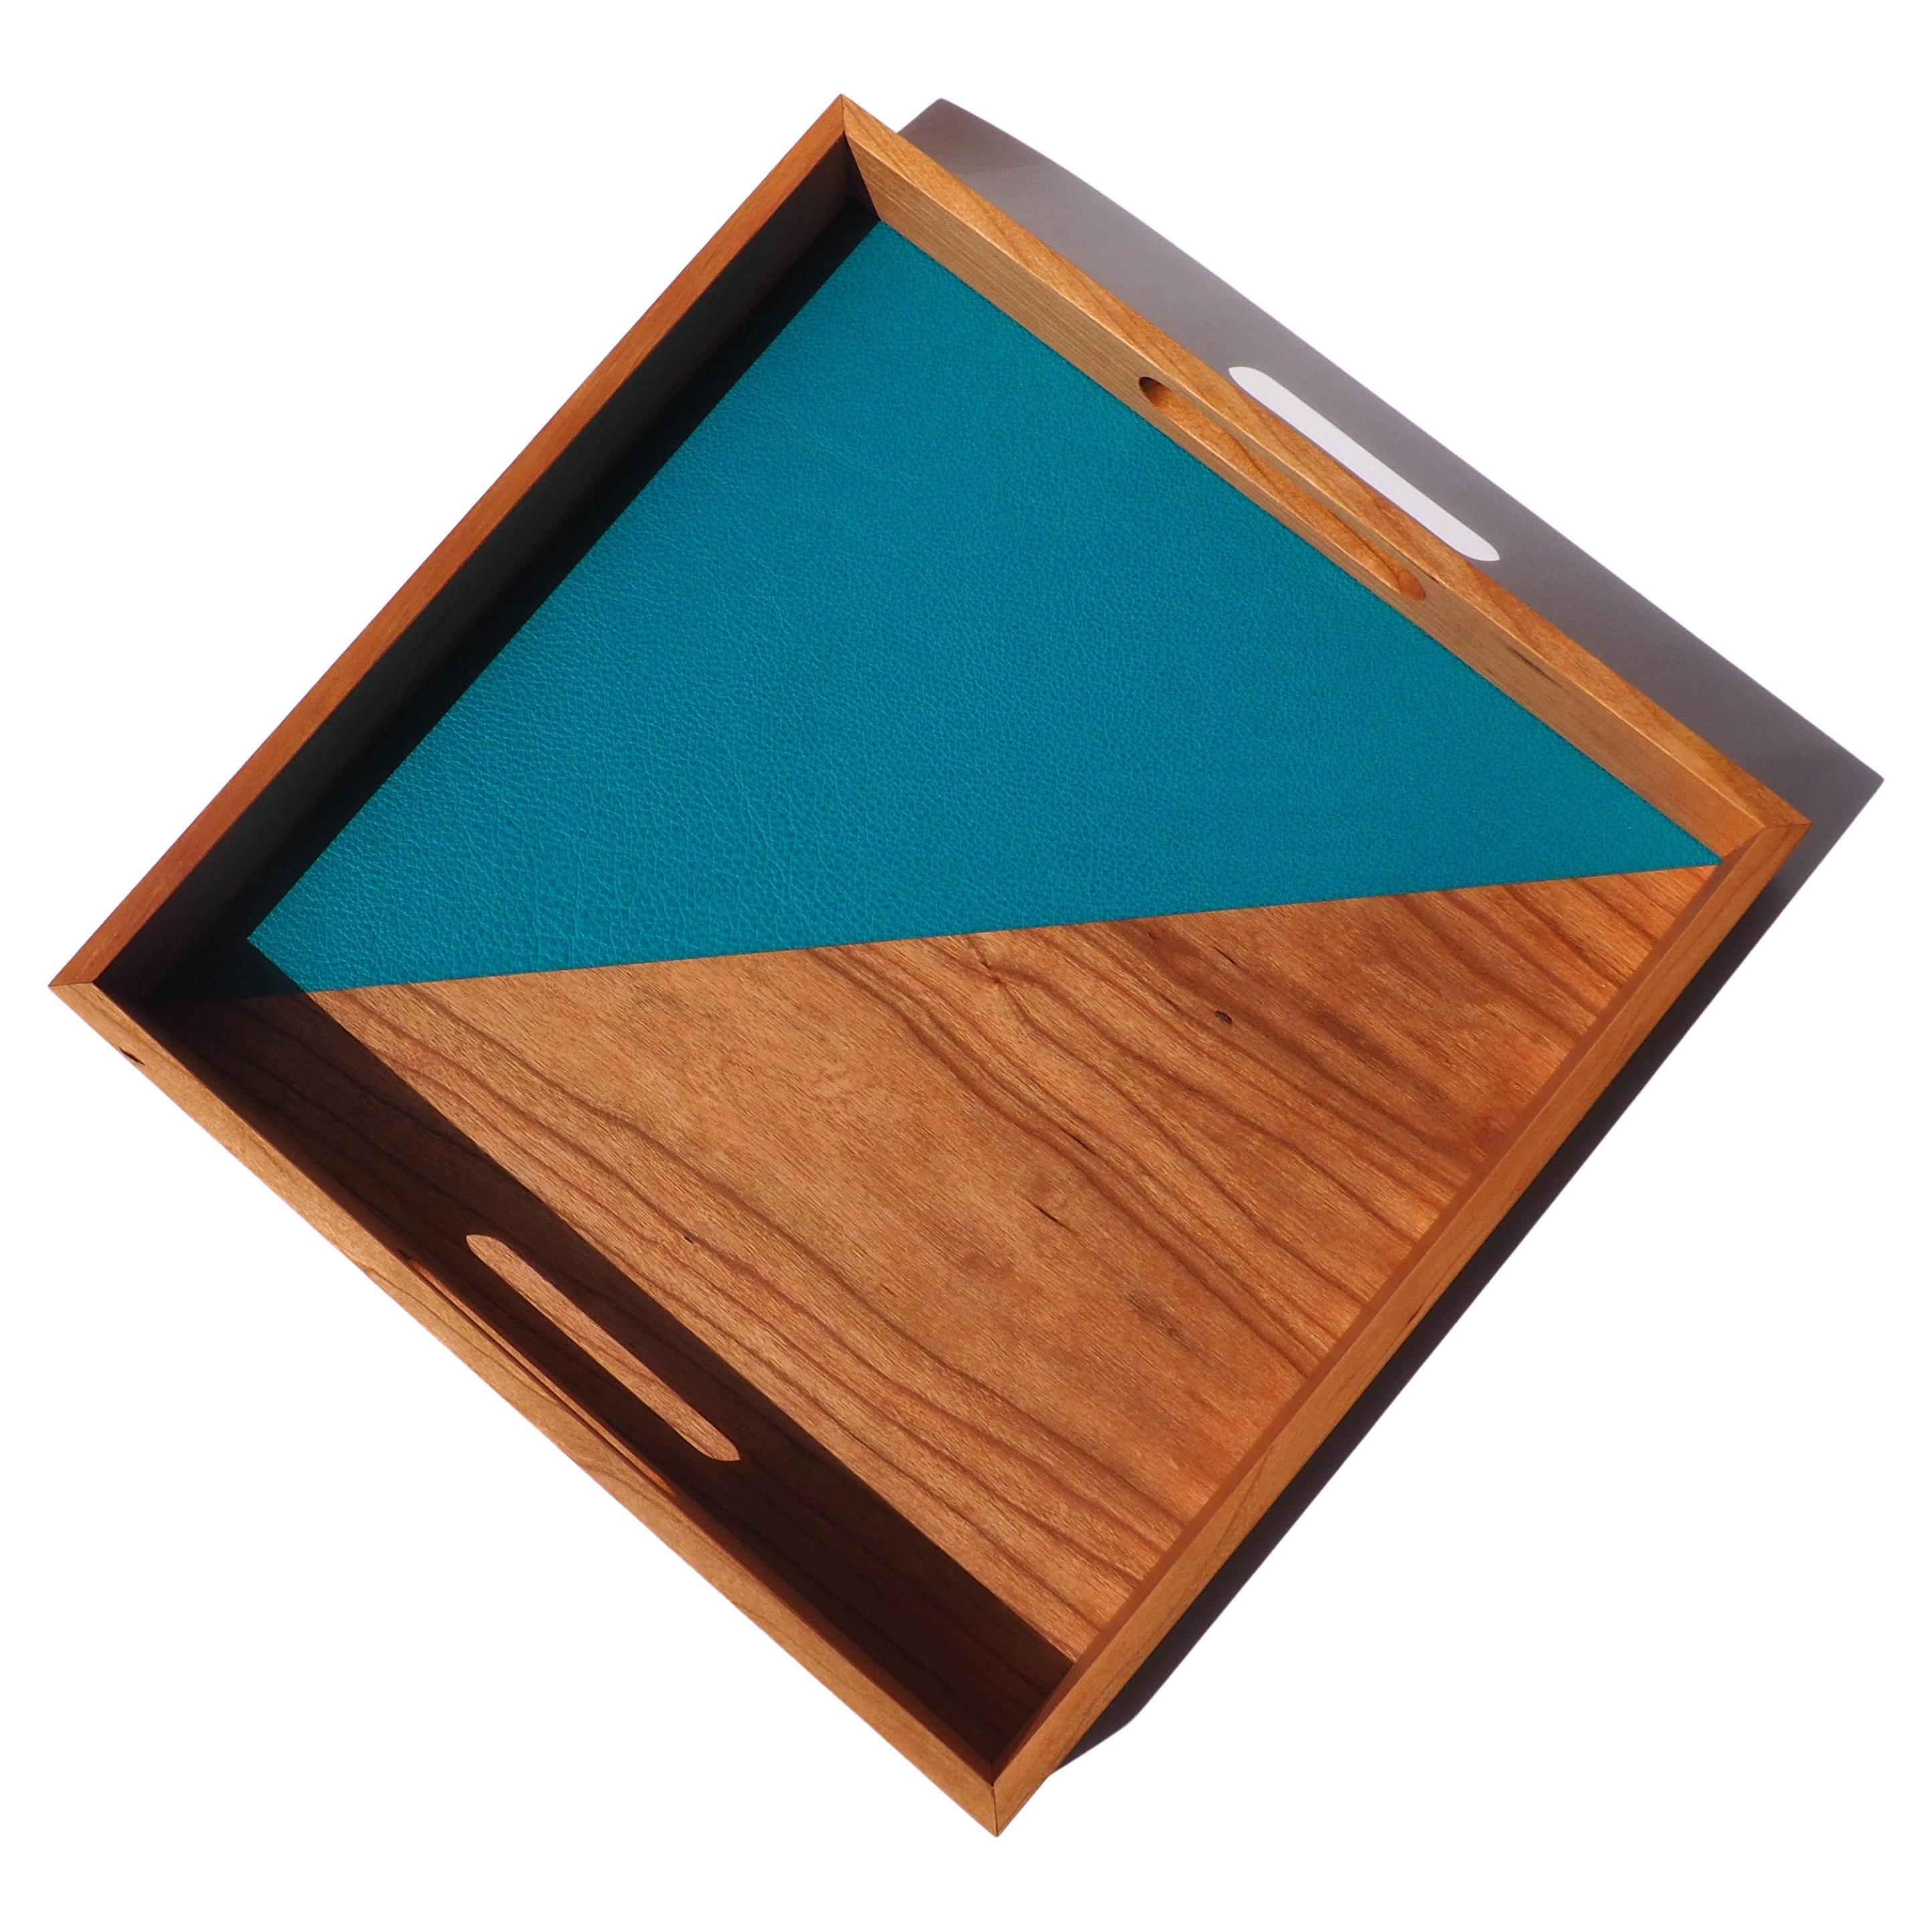 "After Hours" Contemporary square tray in wood and leather by Atelier C.u.b For Sale